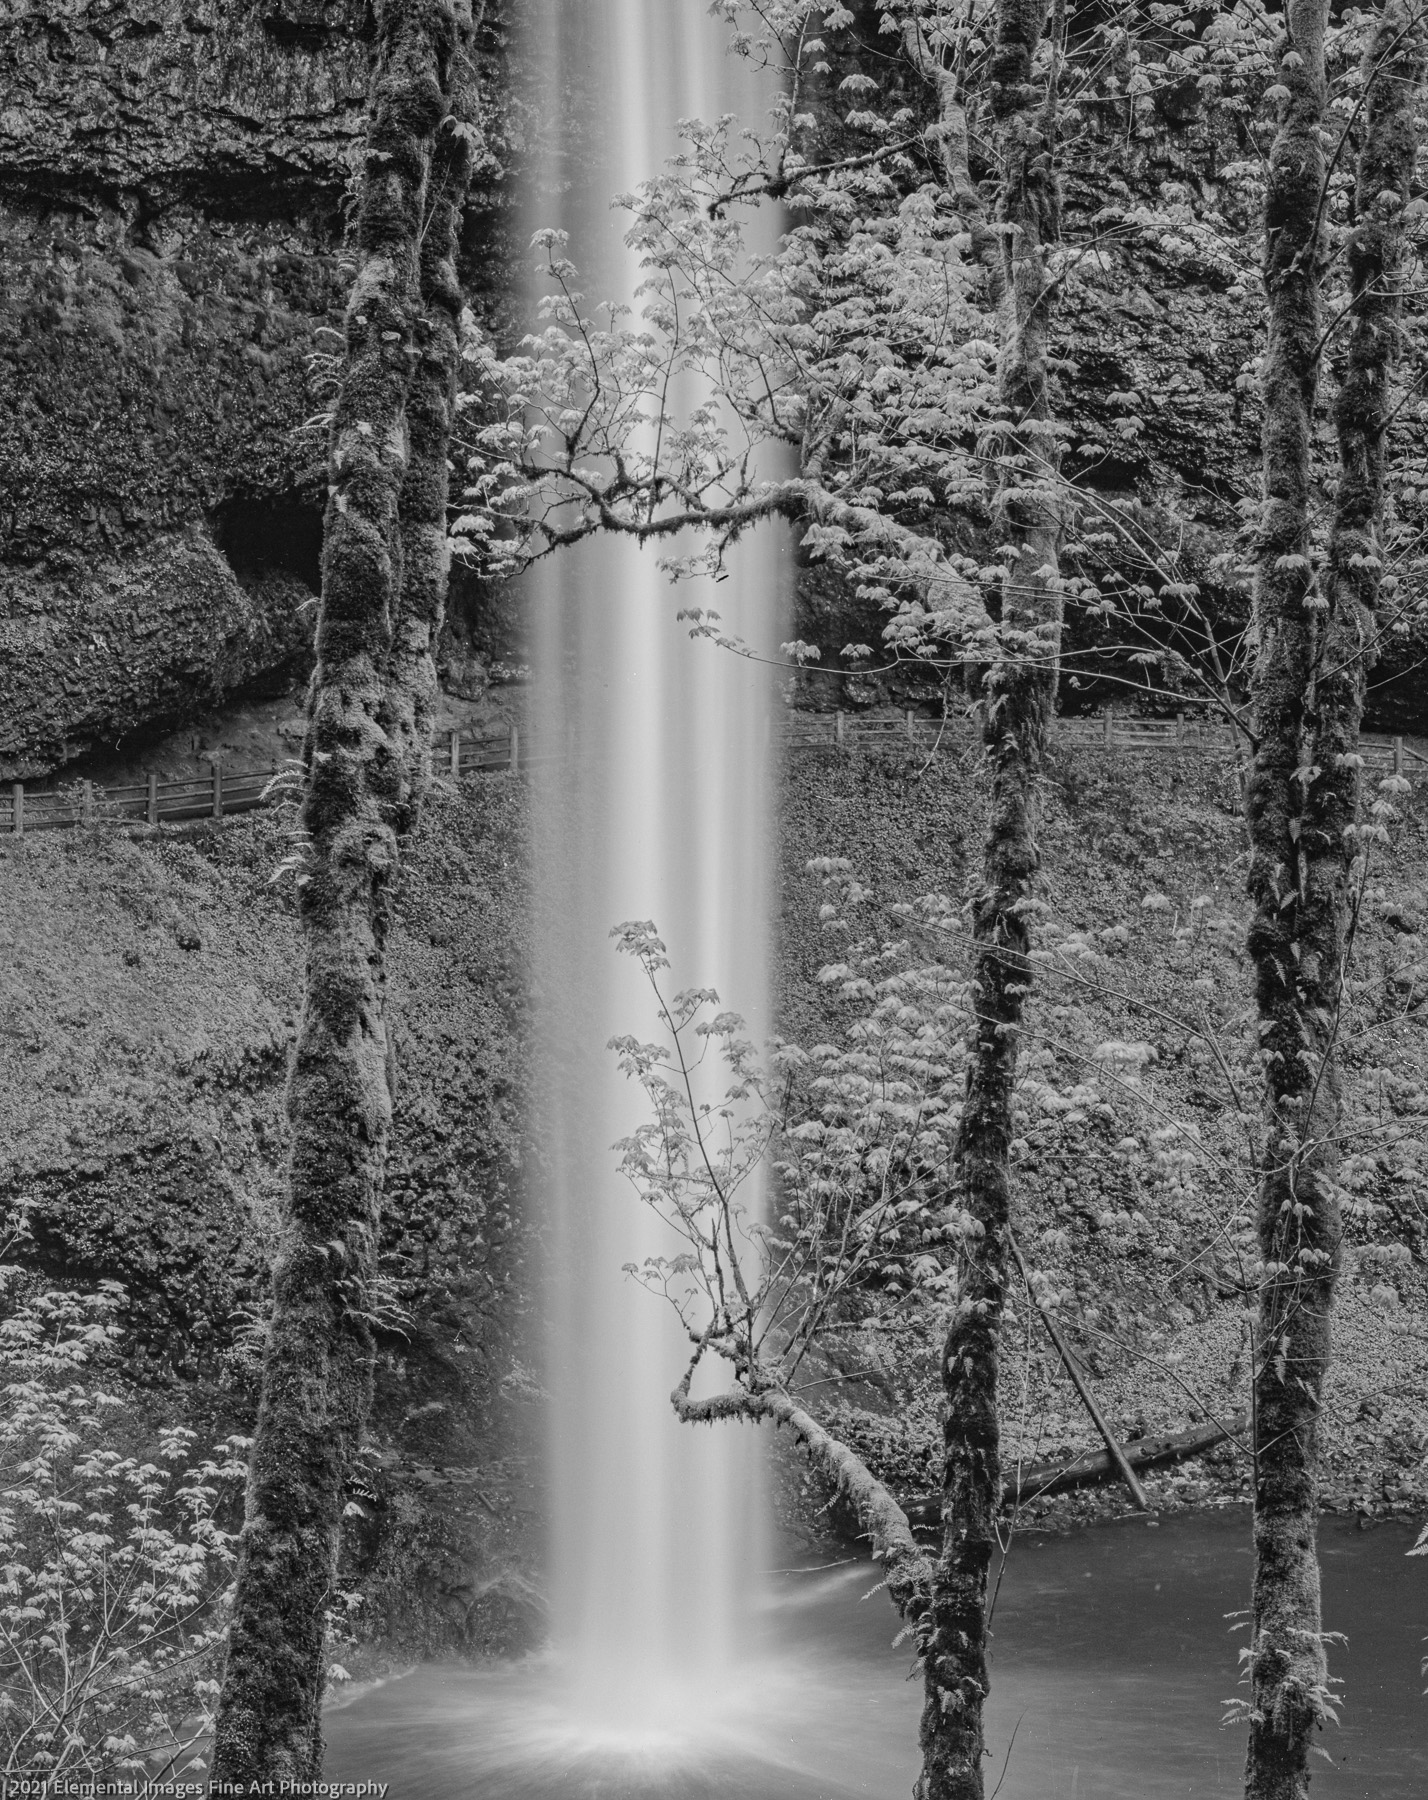 South Falls | Silver Falls State Park | OR | USA - © 2021 Elemental Images Fine Art Photography - All Rights Reserved Worldwide